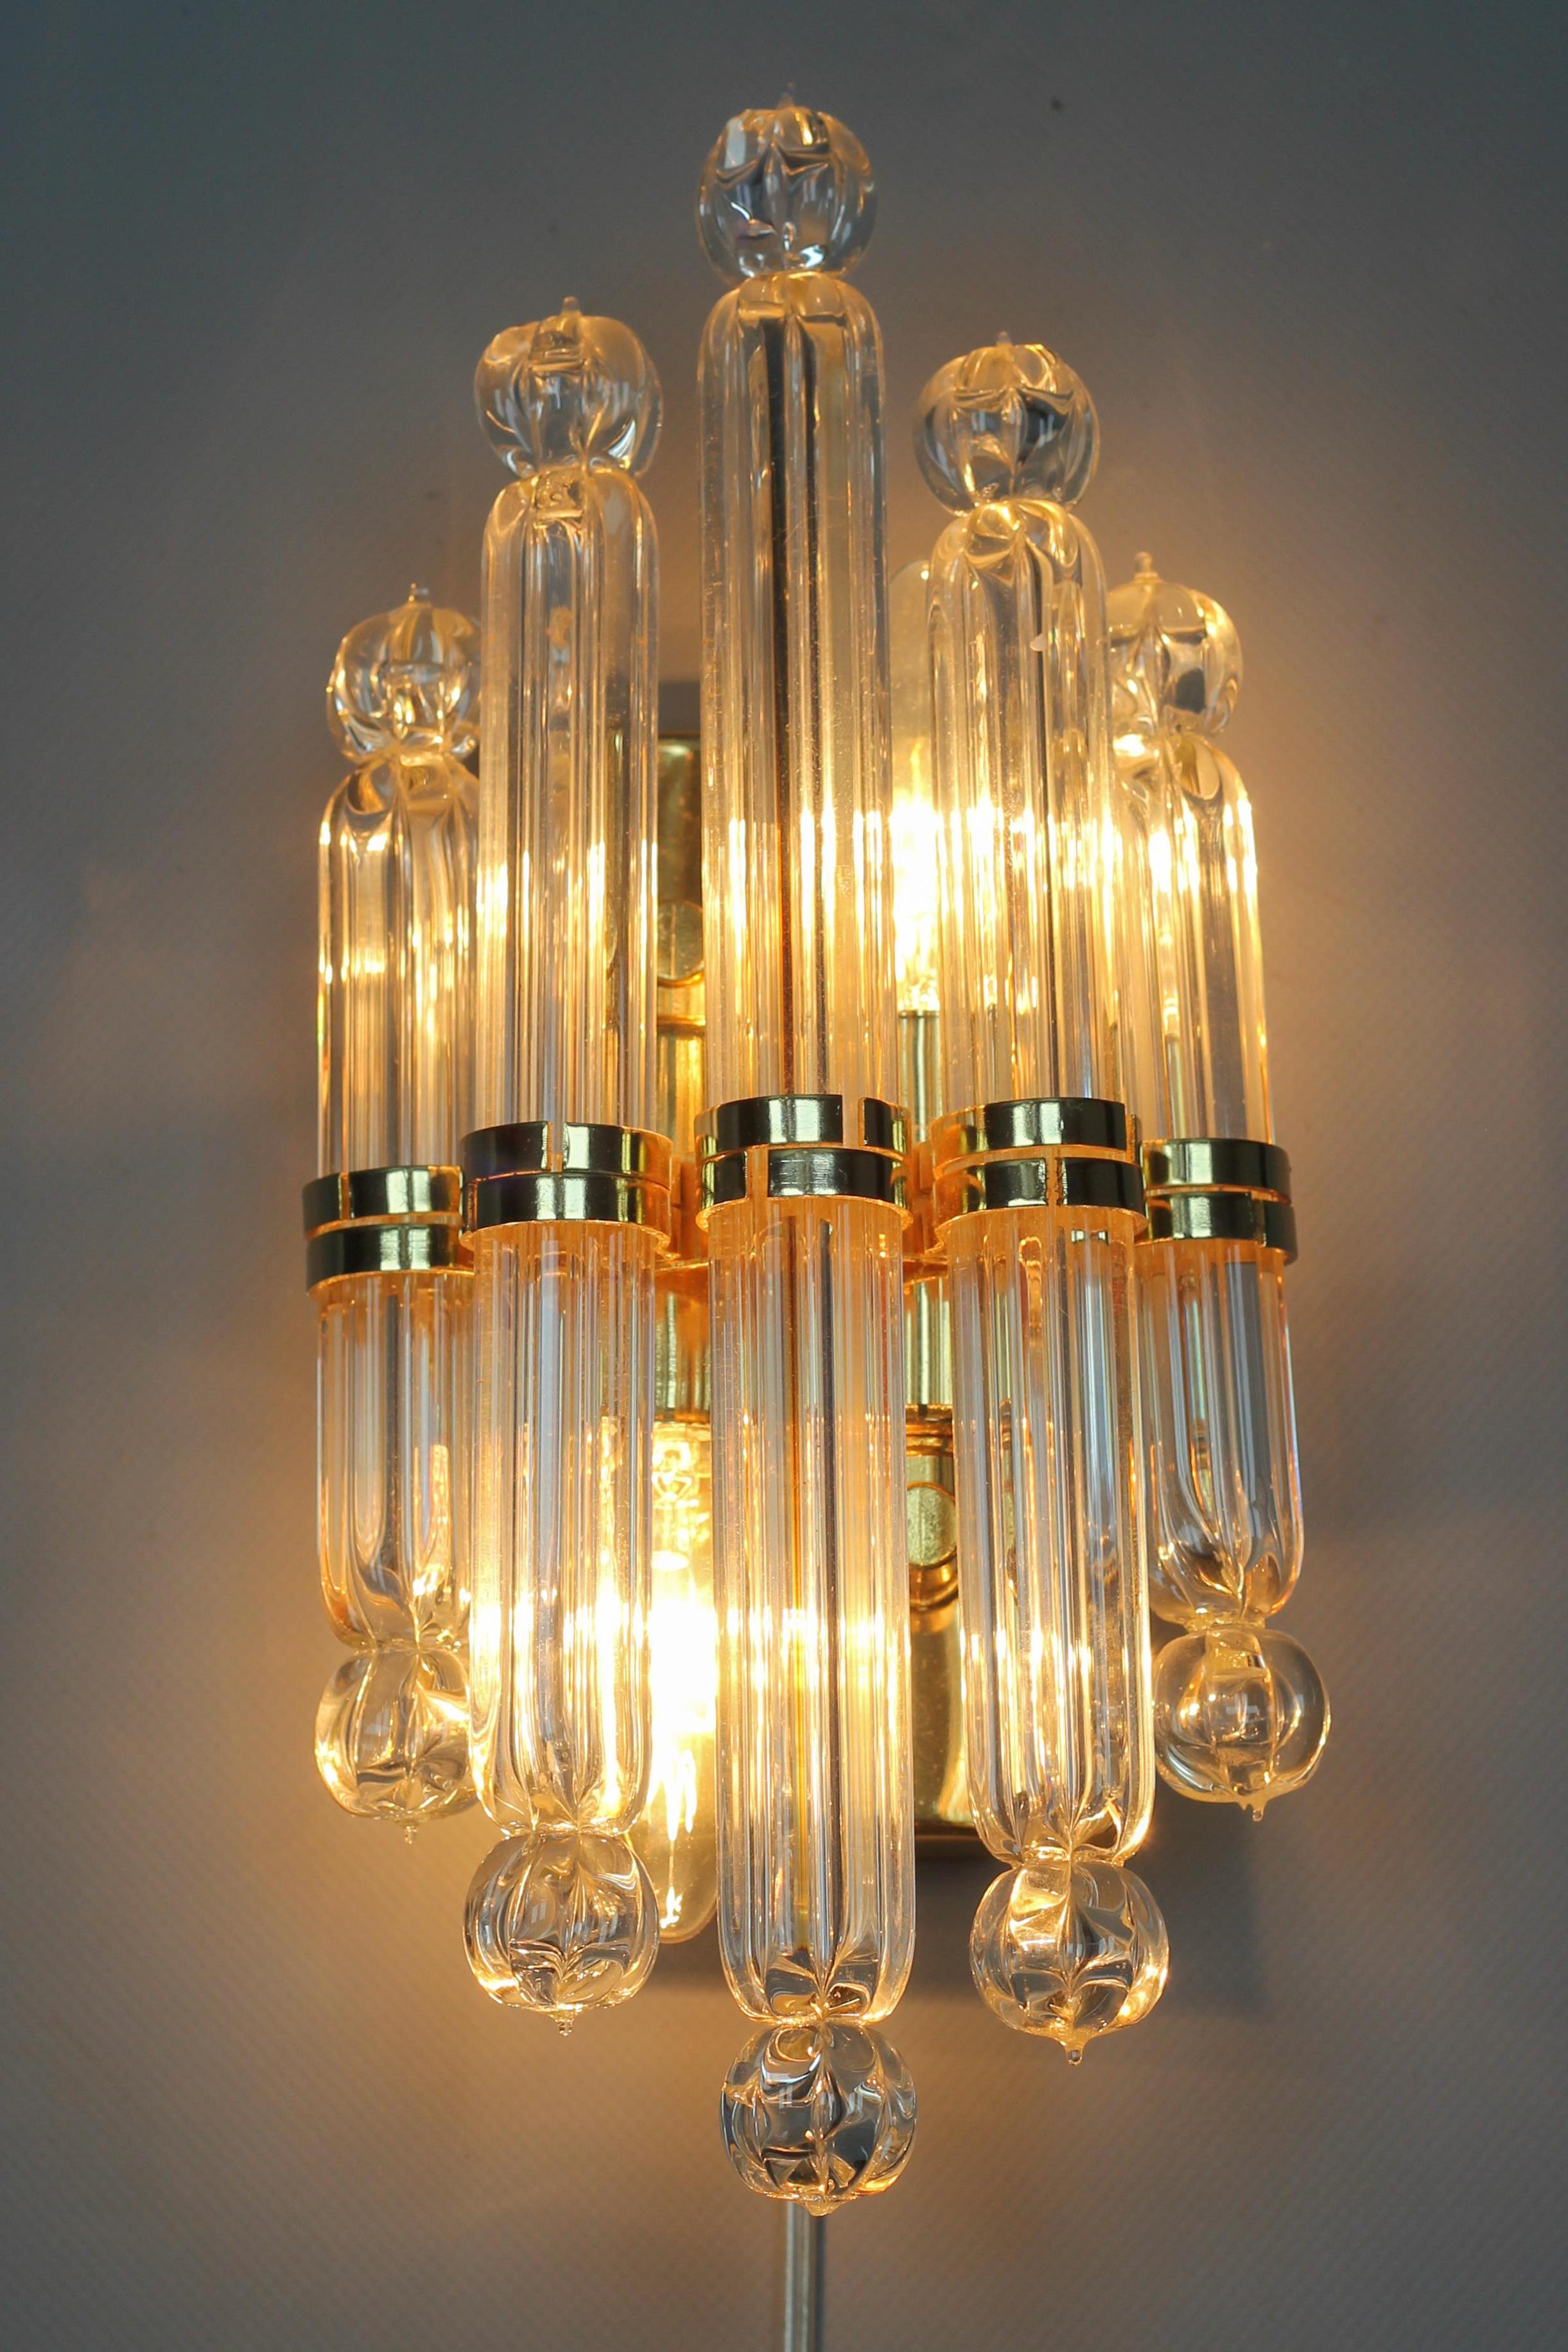 Crystal glass and brass wall lamp by Honsel, Germany, 1980s
This beautiful Art Deco-style two-light wall lamp from the late 20th century features five crystal glass tubes- rods fastened on a brass frame. 
Two sockets for E14 size light bulbs.
In